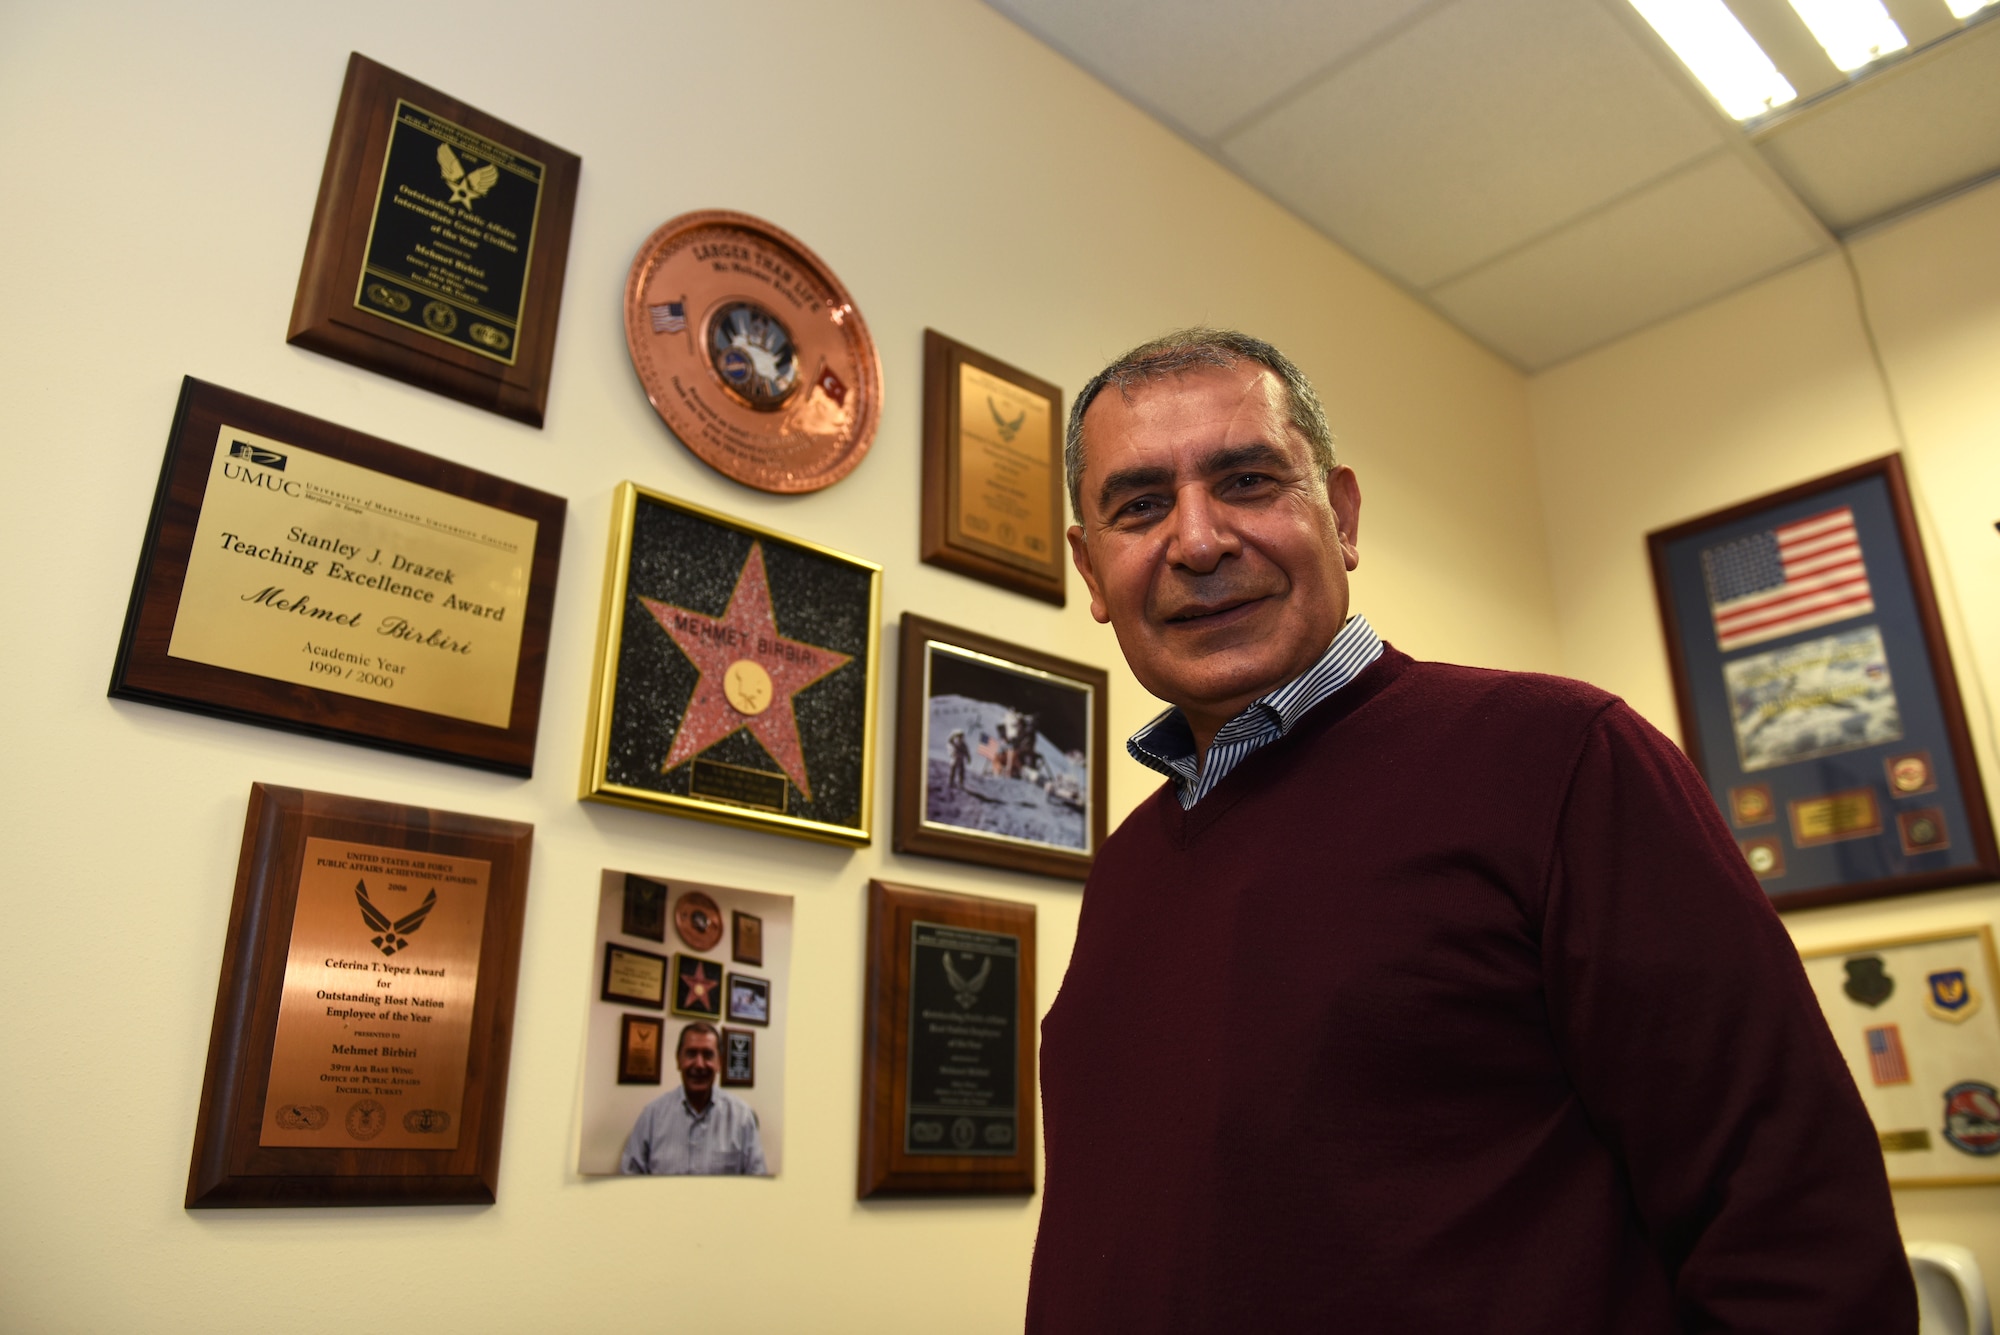 Mehmet Birbiri, 39th Air Base Wing Public Affairs host nation advisor, poses for a photo in his office at Incirlik Air Base, Turkey, 22 March 2021. Birbiri stands in front of several awards and recognitions he’s received over his many years of service. (U.S Air Force Photo by Senior Airman Matthew Angulo)